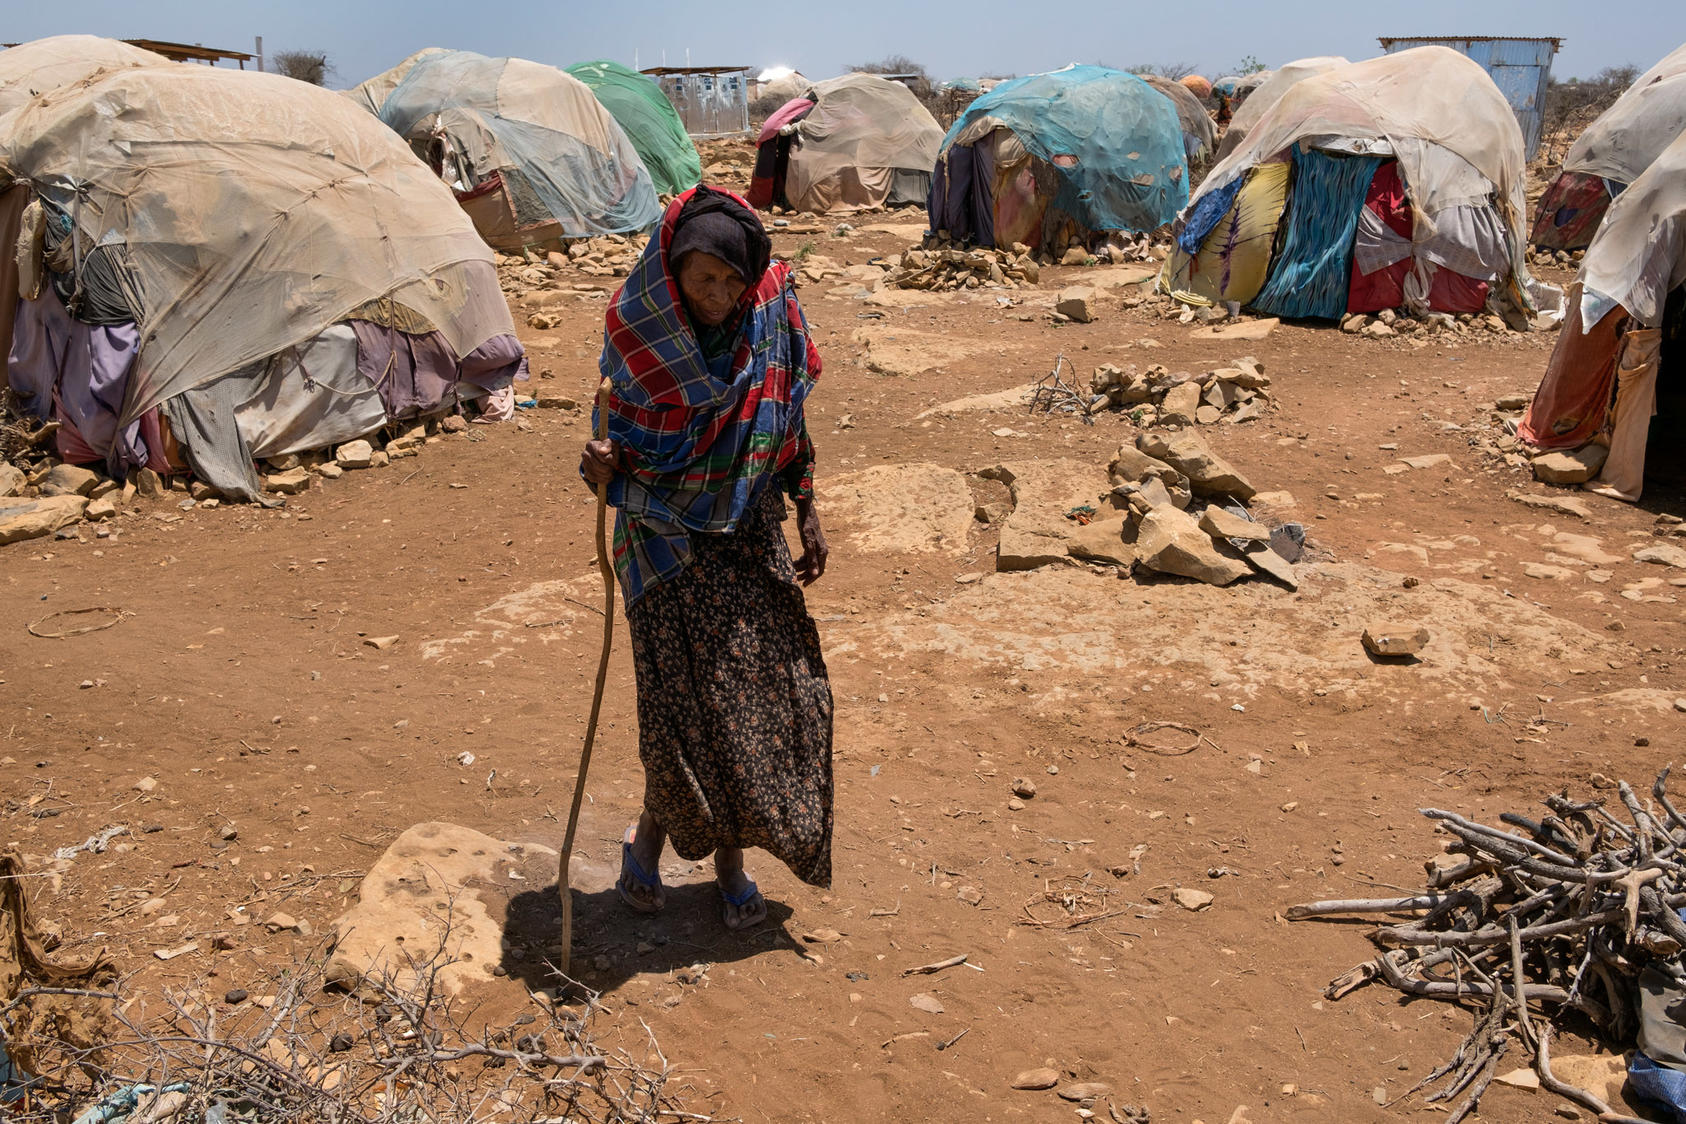 An elderly woman, displaced by the drought in Somalia, walks between makeshift tents at a camp in Baidoa, March 9, 2017.